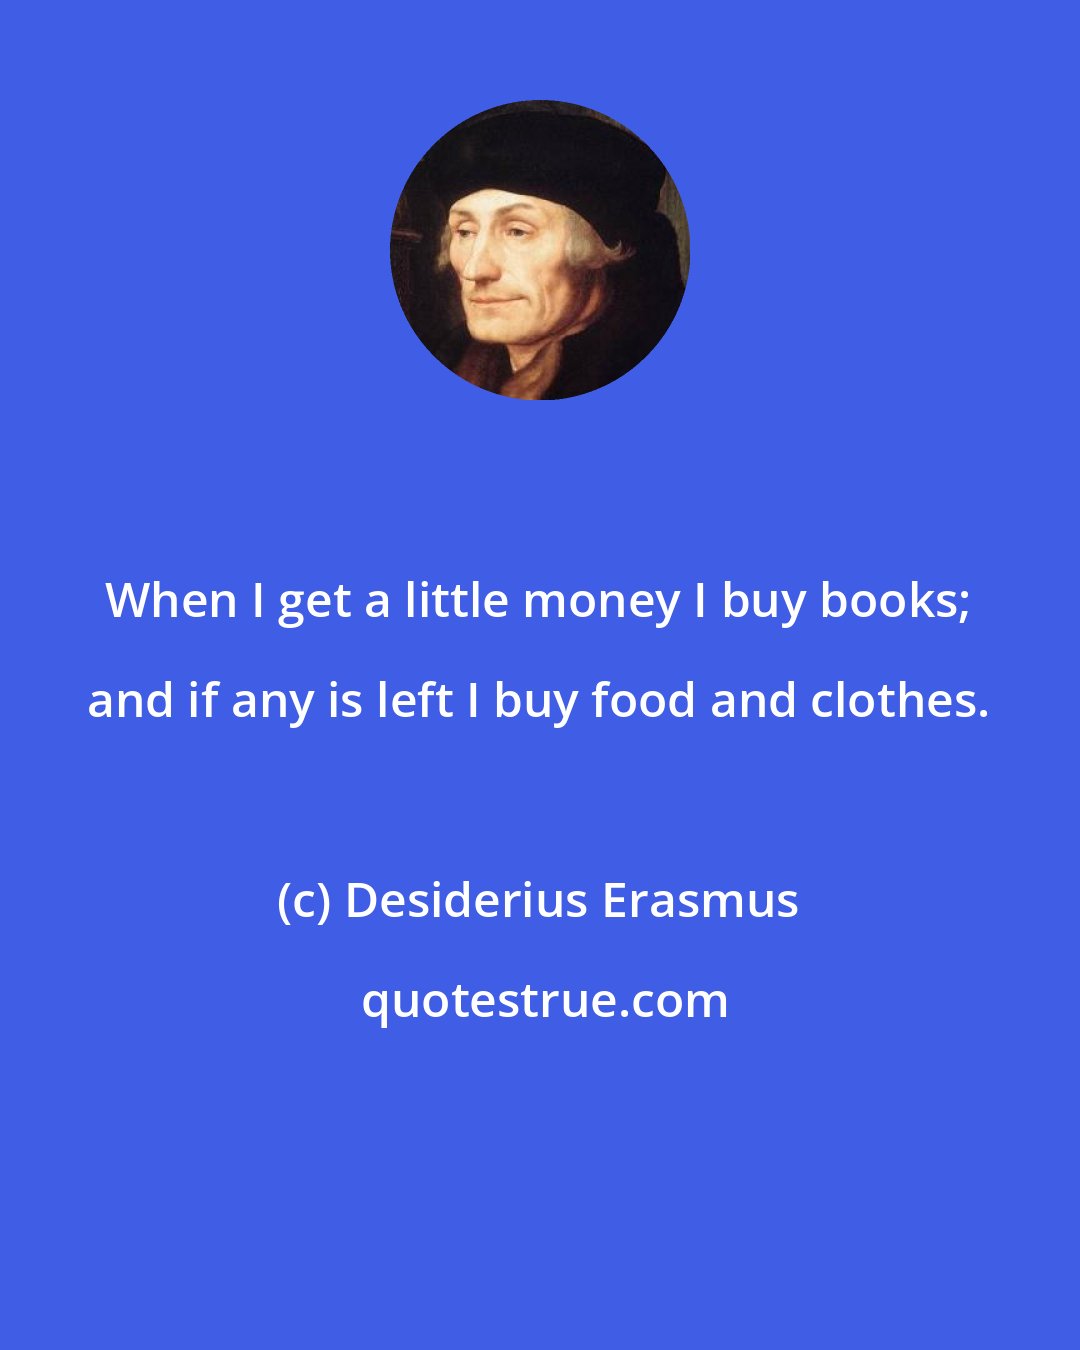 Desiderius Erasmus: When I get a little money I buy books; and if any is left I buy food and clothes.